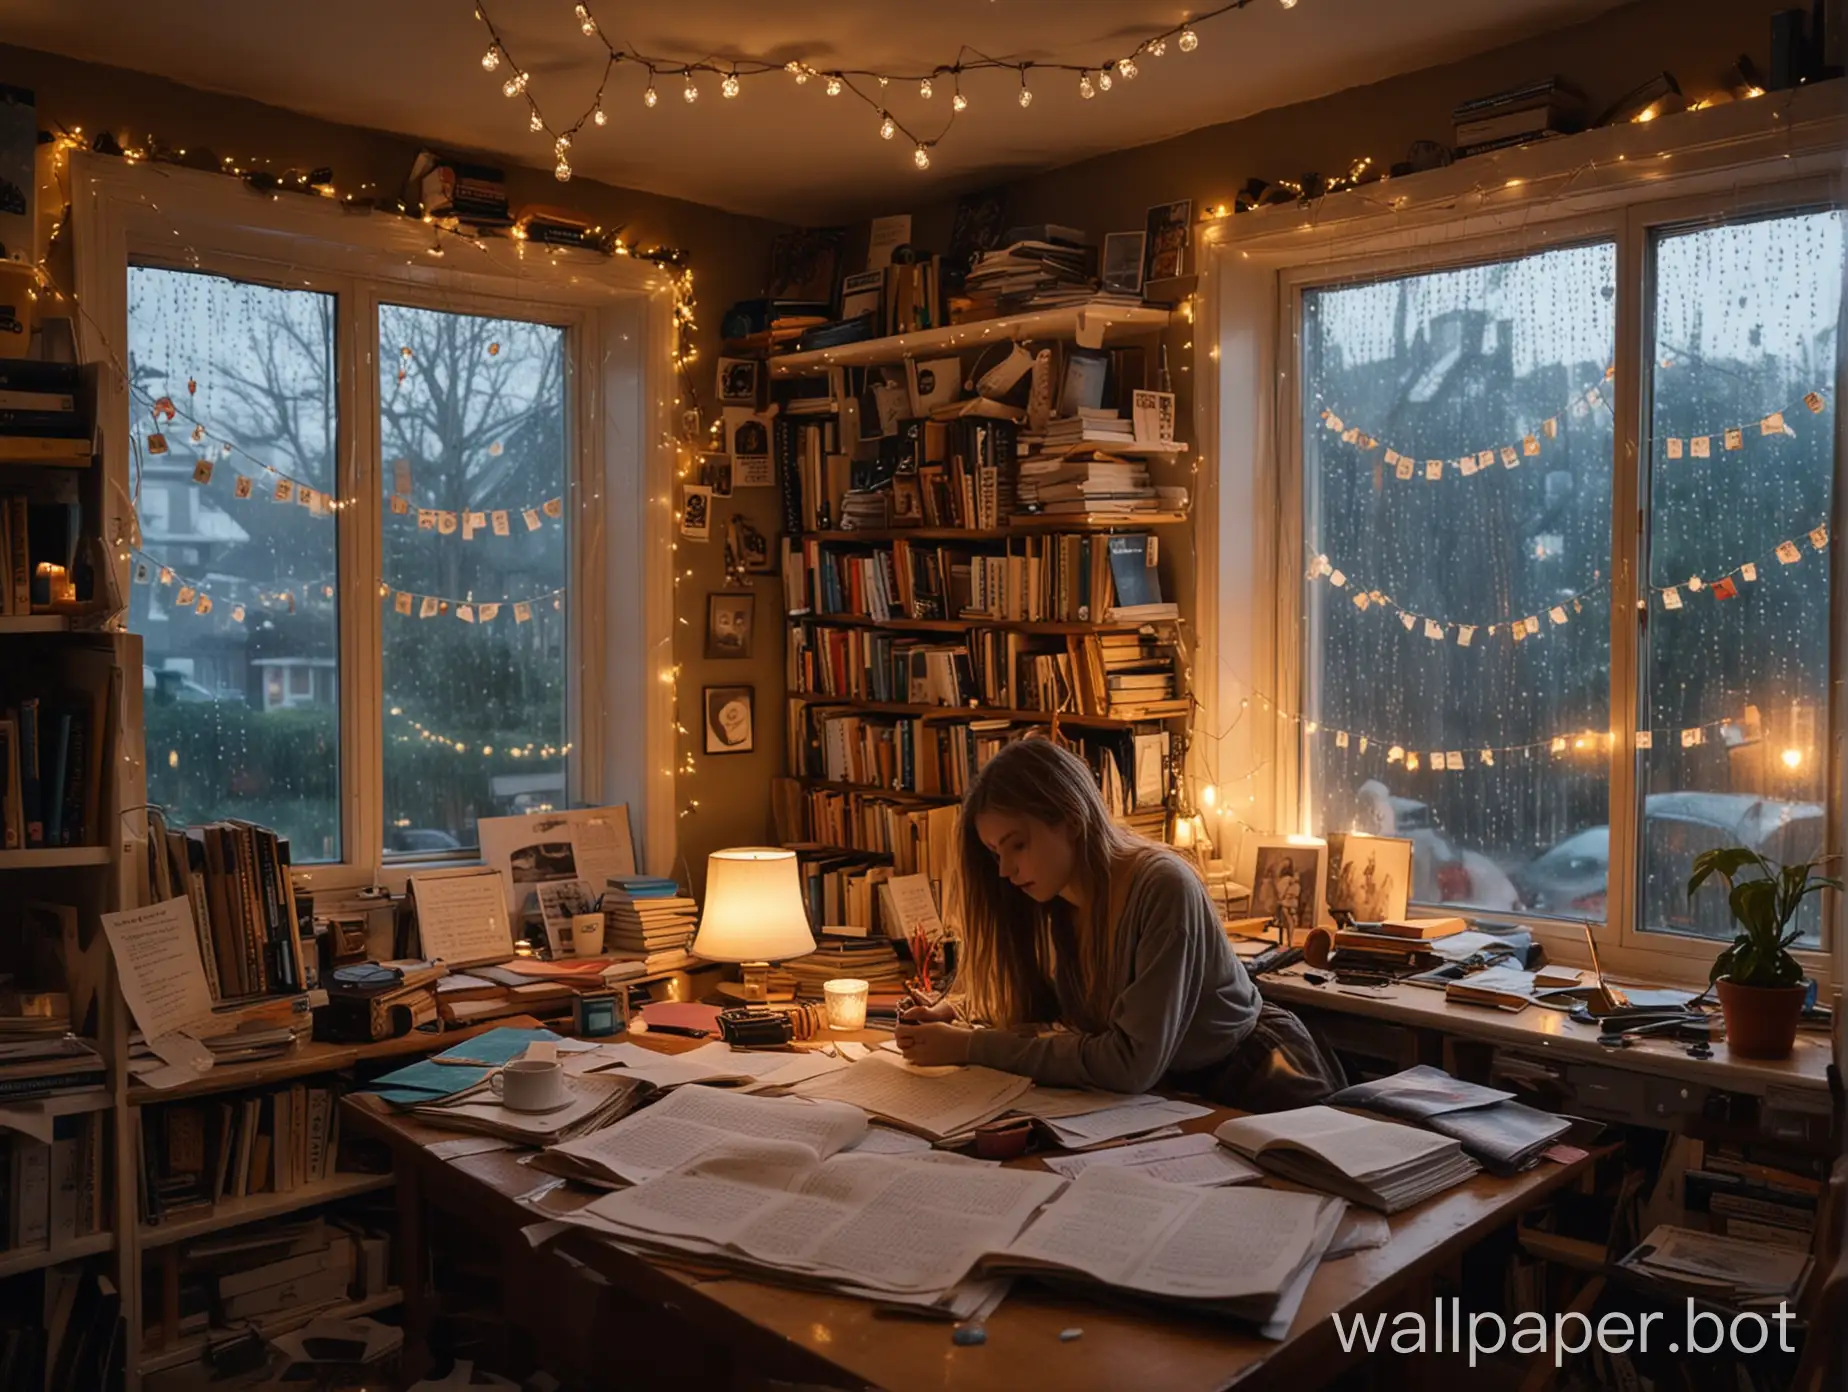 girl studying, face not visible , backside and hair visible, notes all over study desk, night time, coffee kept on the table, pen in hand, rain visible through window, window above desk, big bookshelf beside her, fireplace, academia setting, bean bags in room, books kept in random places, fairy lights all over ceiling, posters and records of music hung on wall